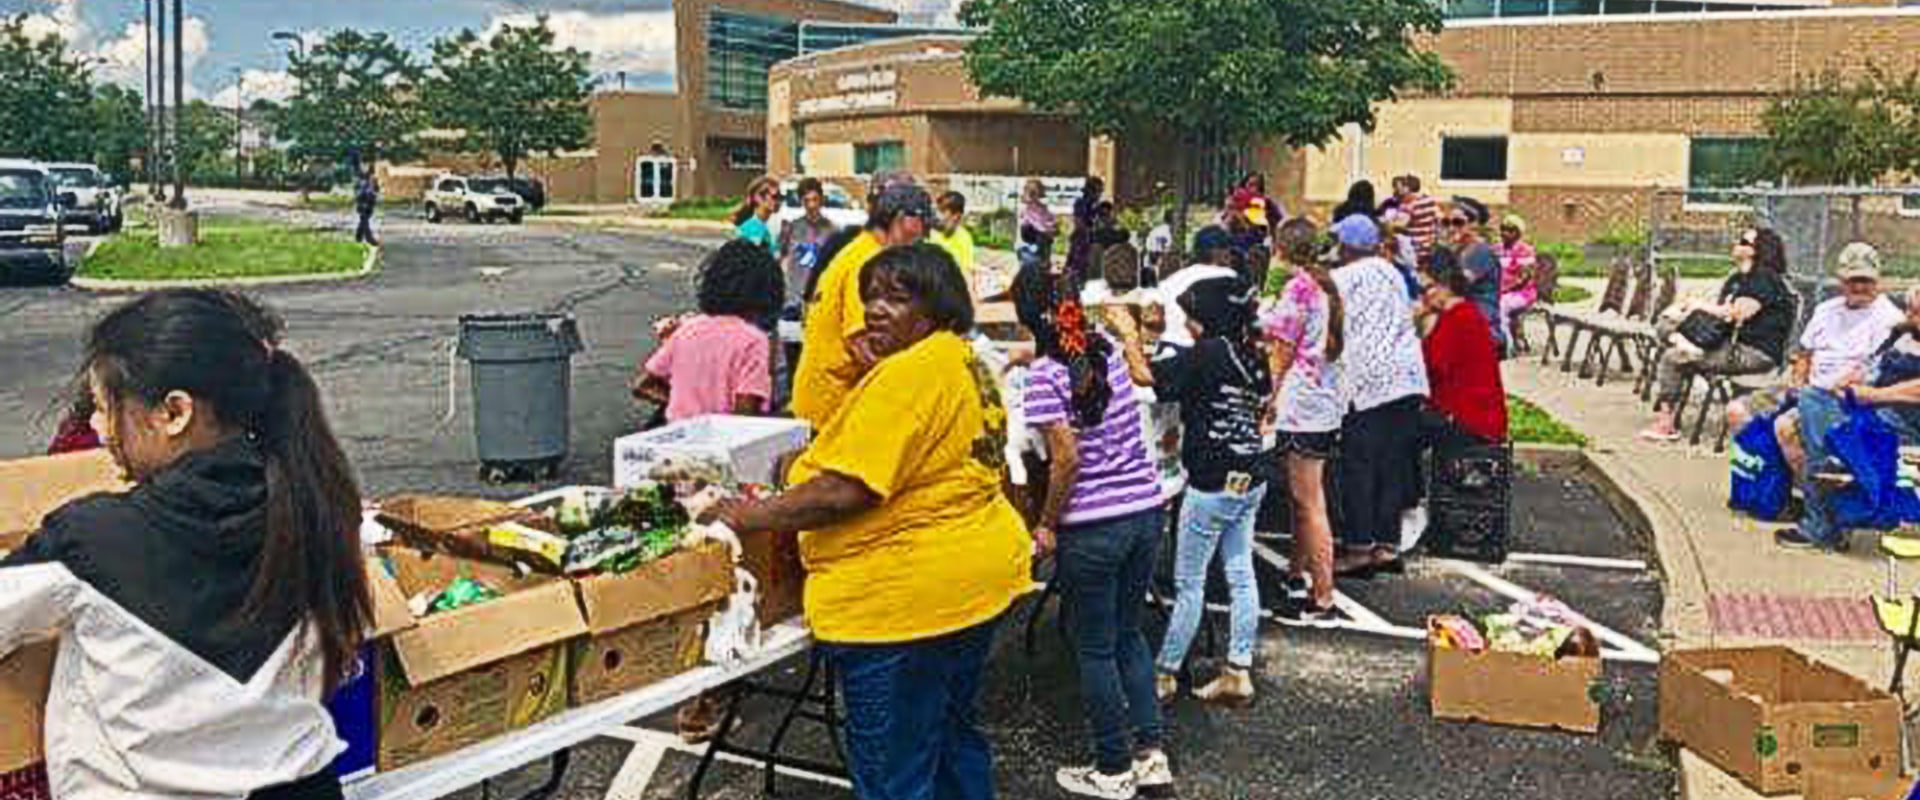 Community Programs in Akron, Ohio: Providing Food Assistance and Meal Services